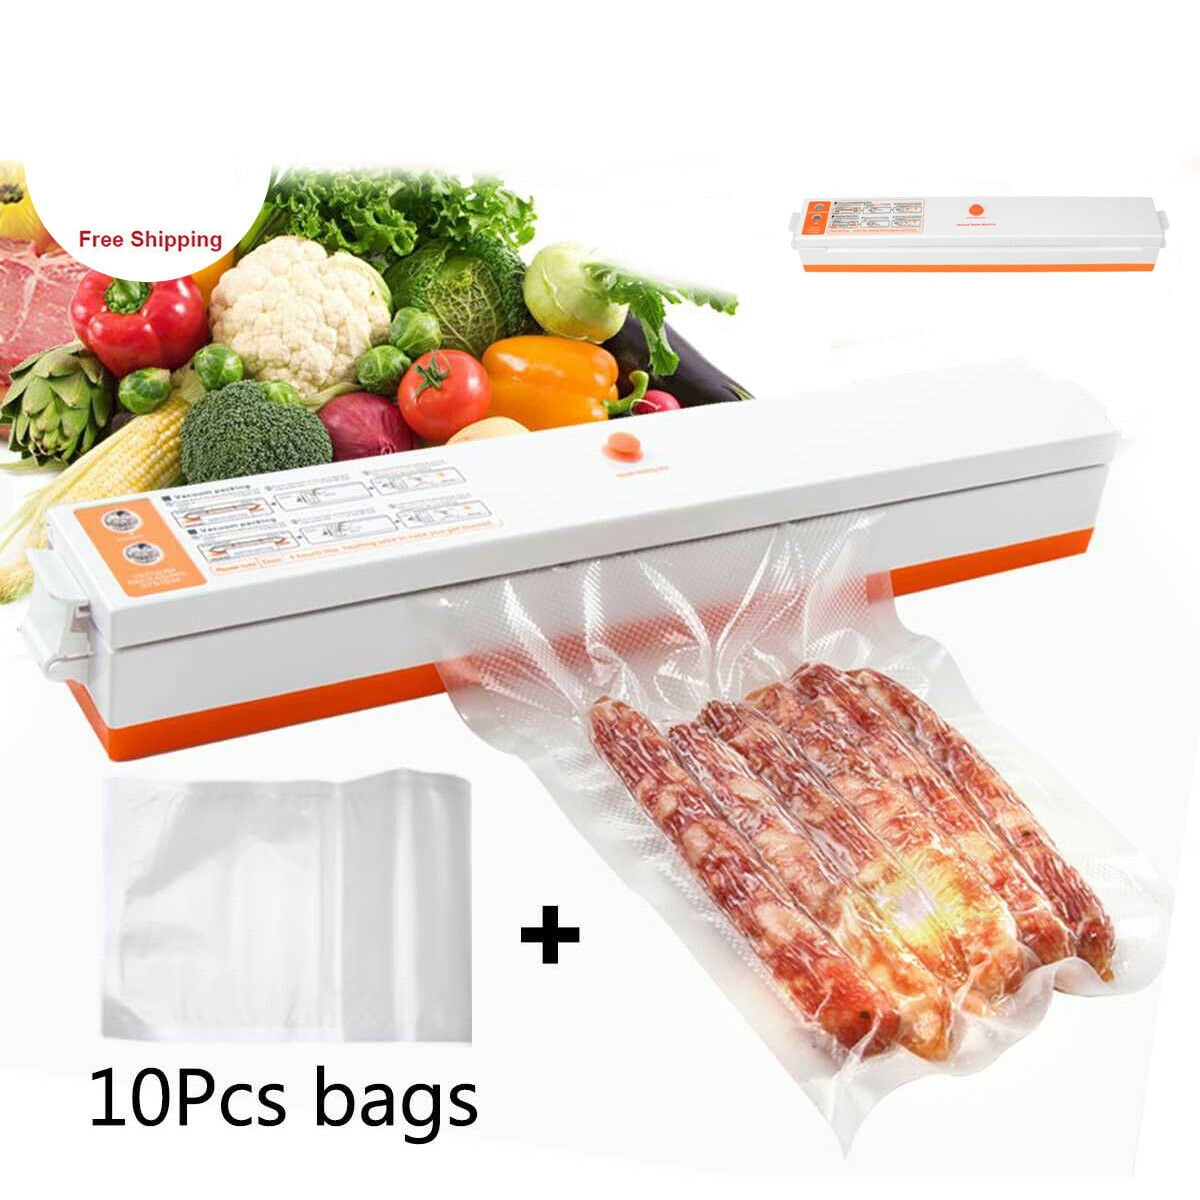 Commercial Food Saver Vacuum Sealer Seal A Meal Machine Foodsaver with FREE Bags 